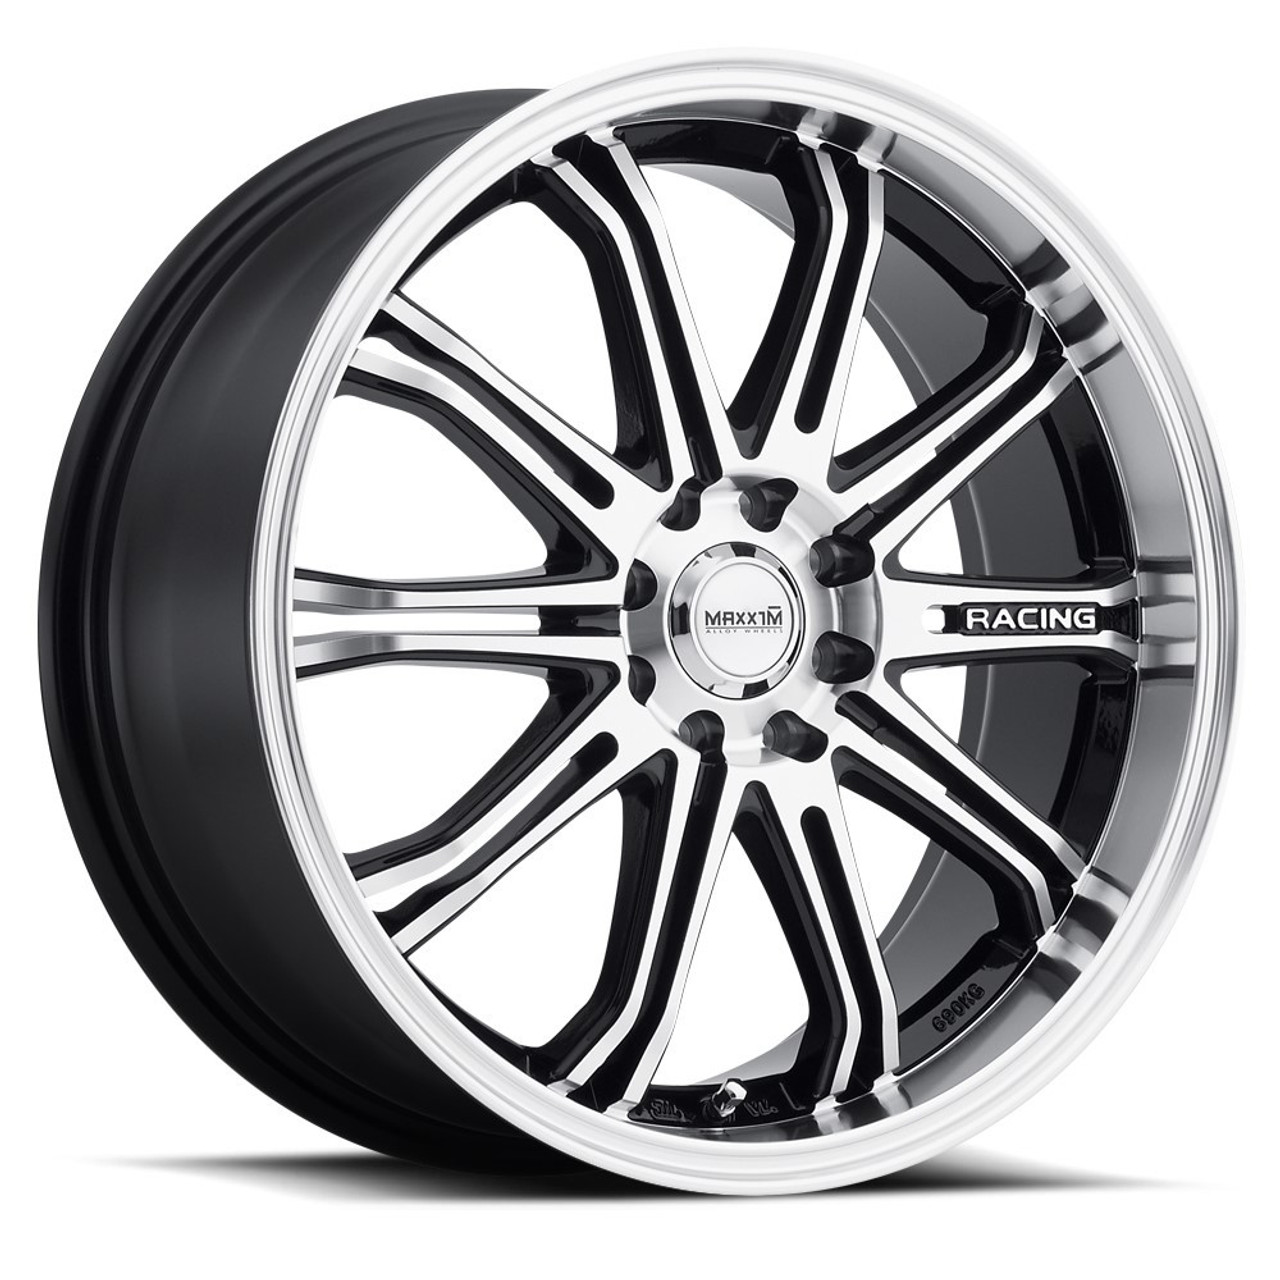 Set 4 16" Maxxim 41MB Ferris machined face and lip with gloss black accents 16x7 Wheels 5x110 5x115 +40mm